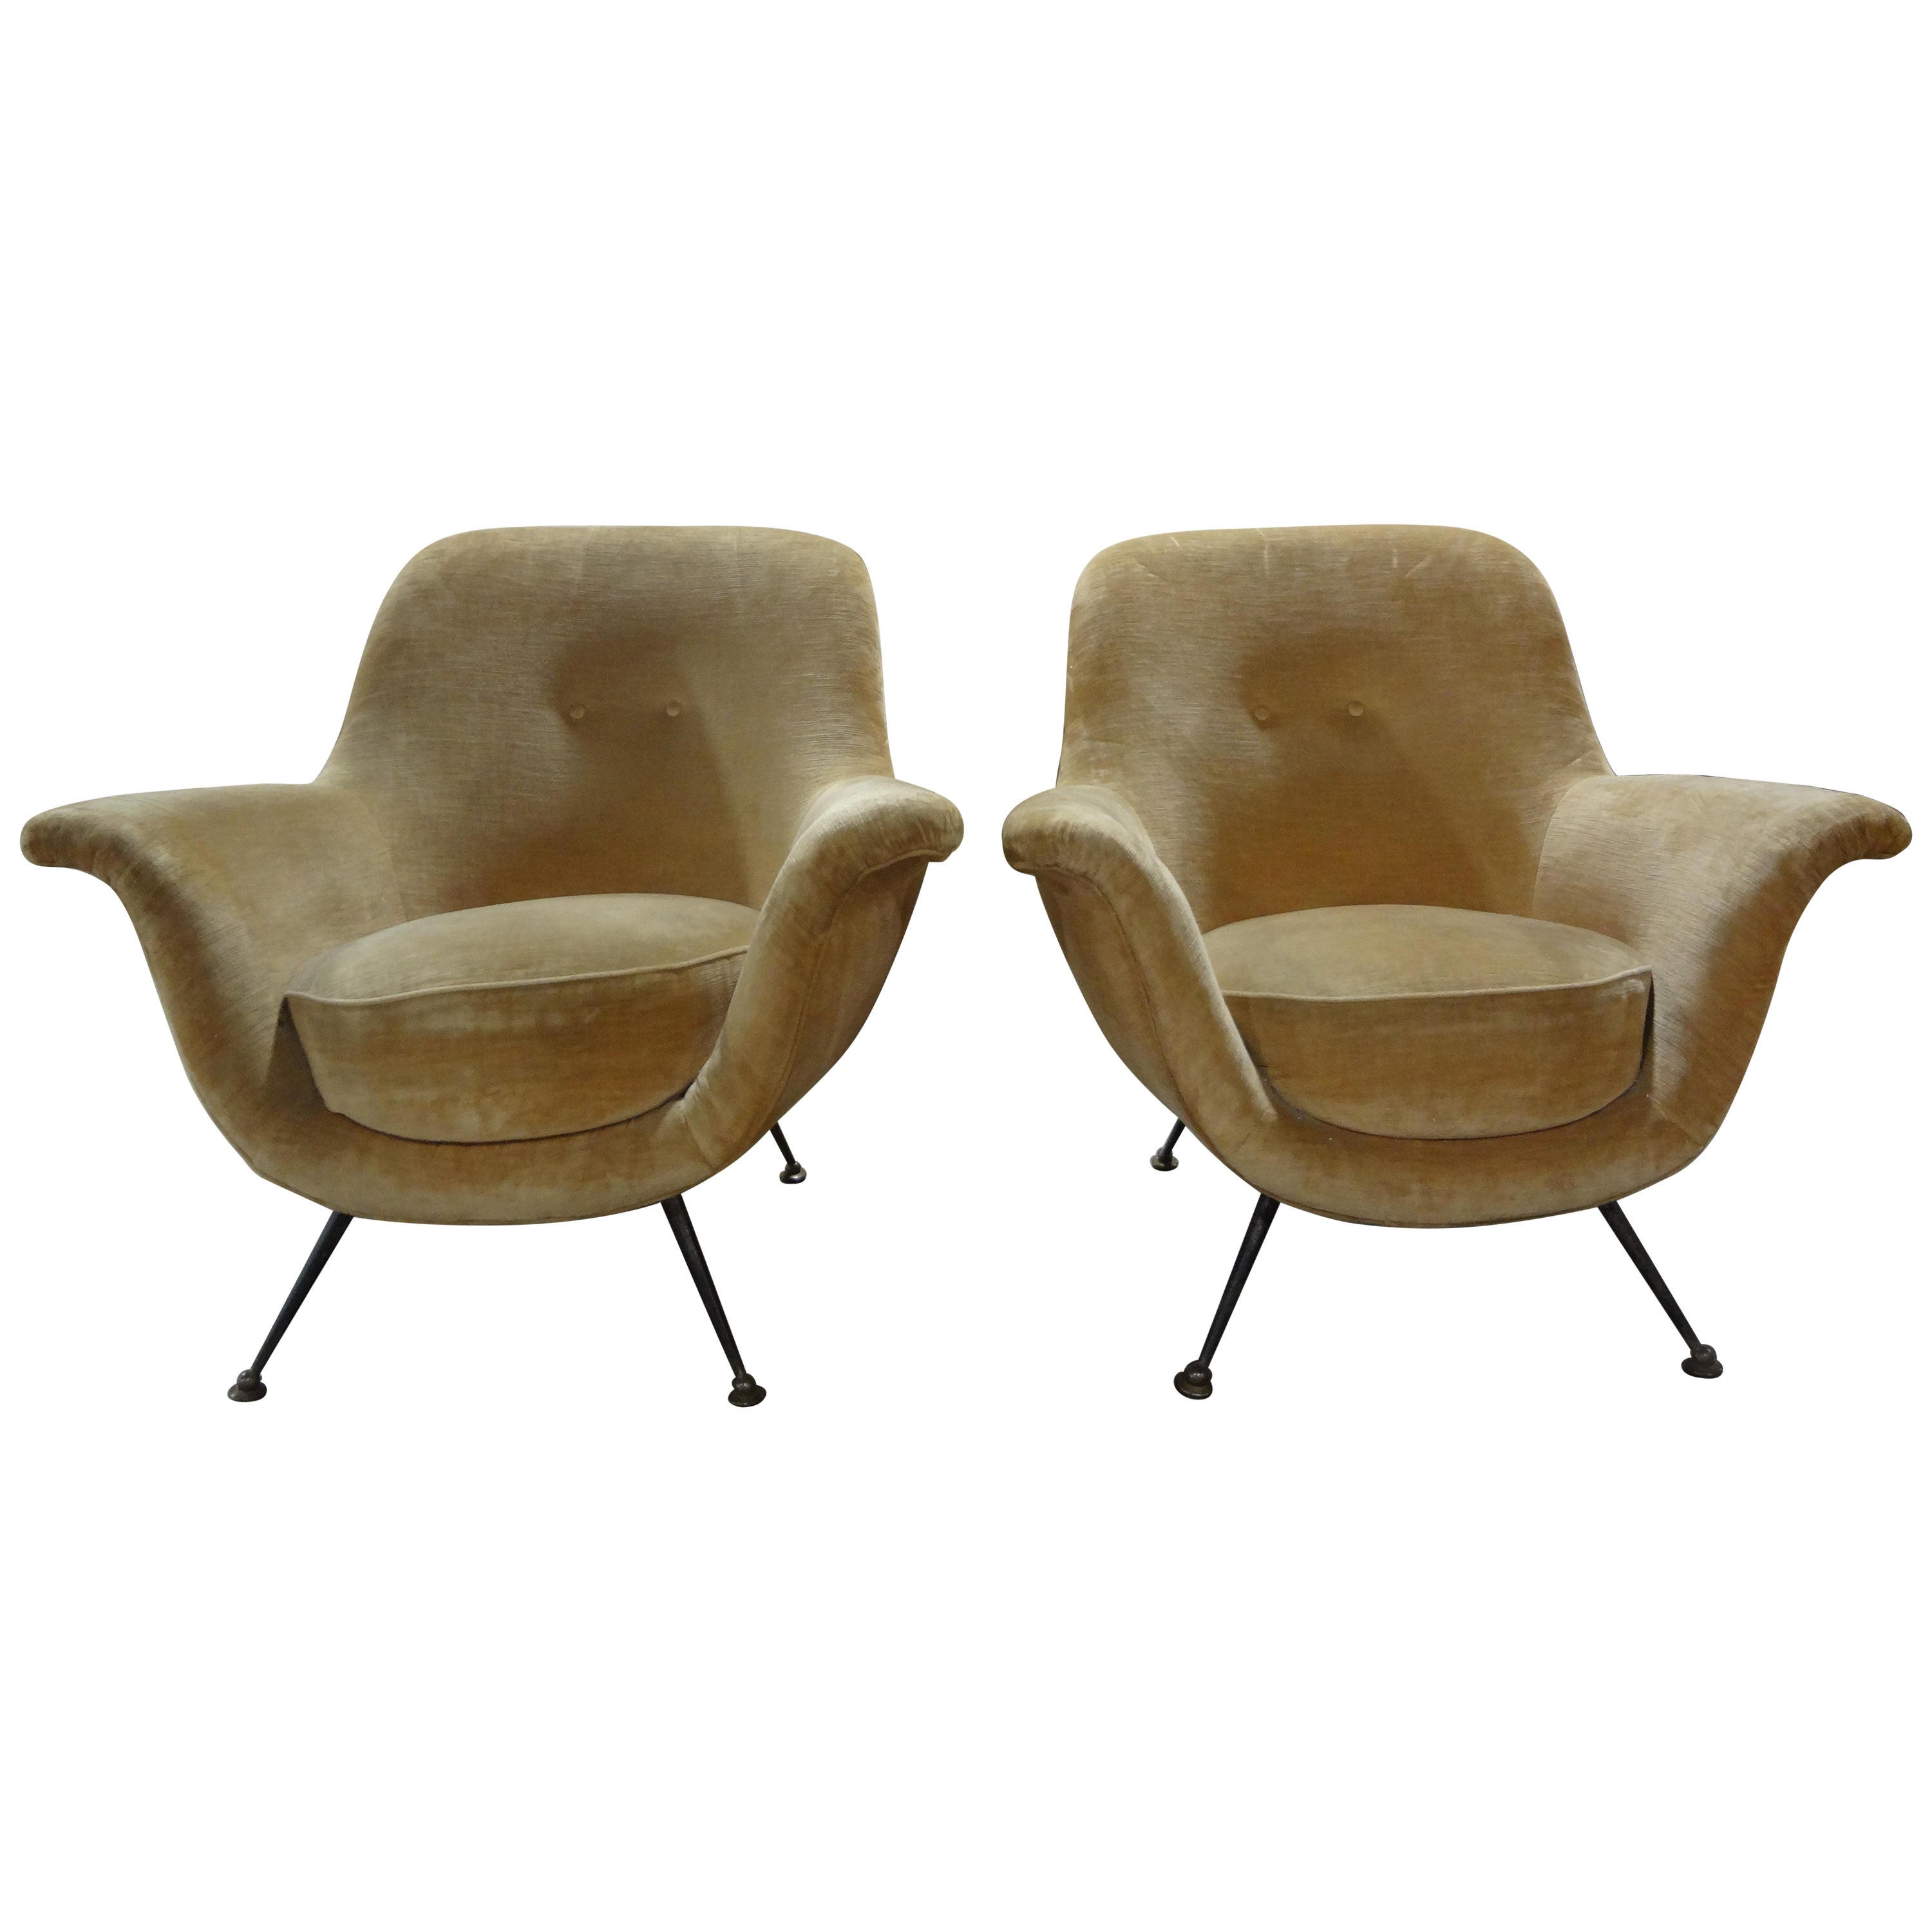 Pair Of Italian Modern Sculptural Lounge Chairs For Sale